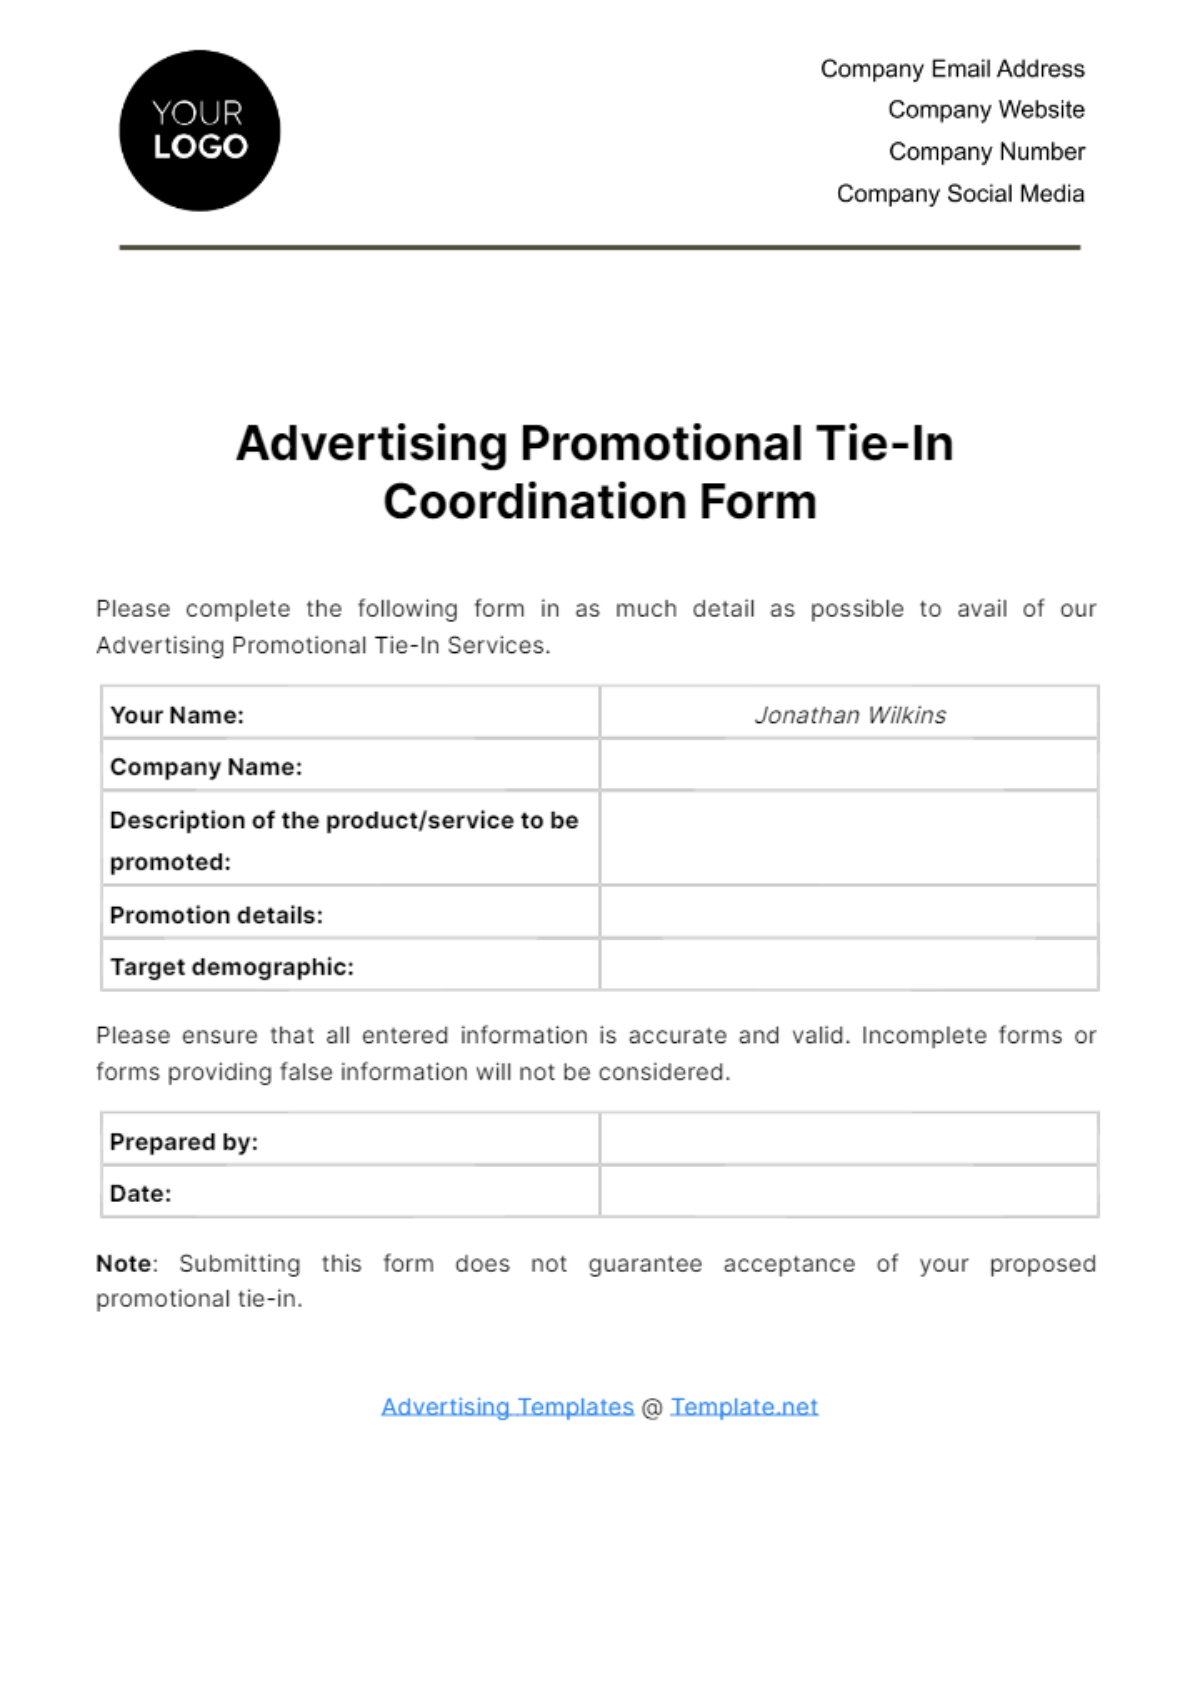 Free Advertising Promotional Tie-In Coordination Form Template